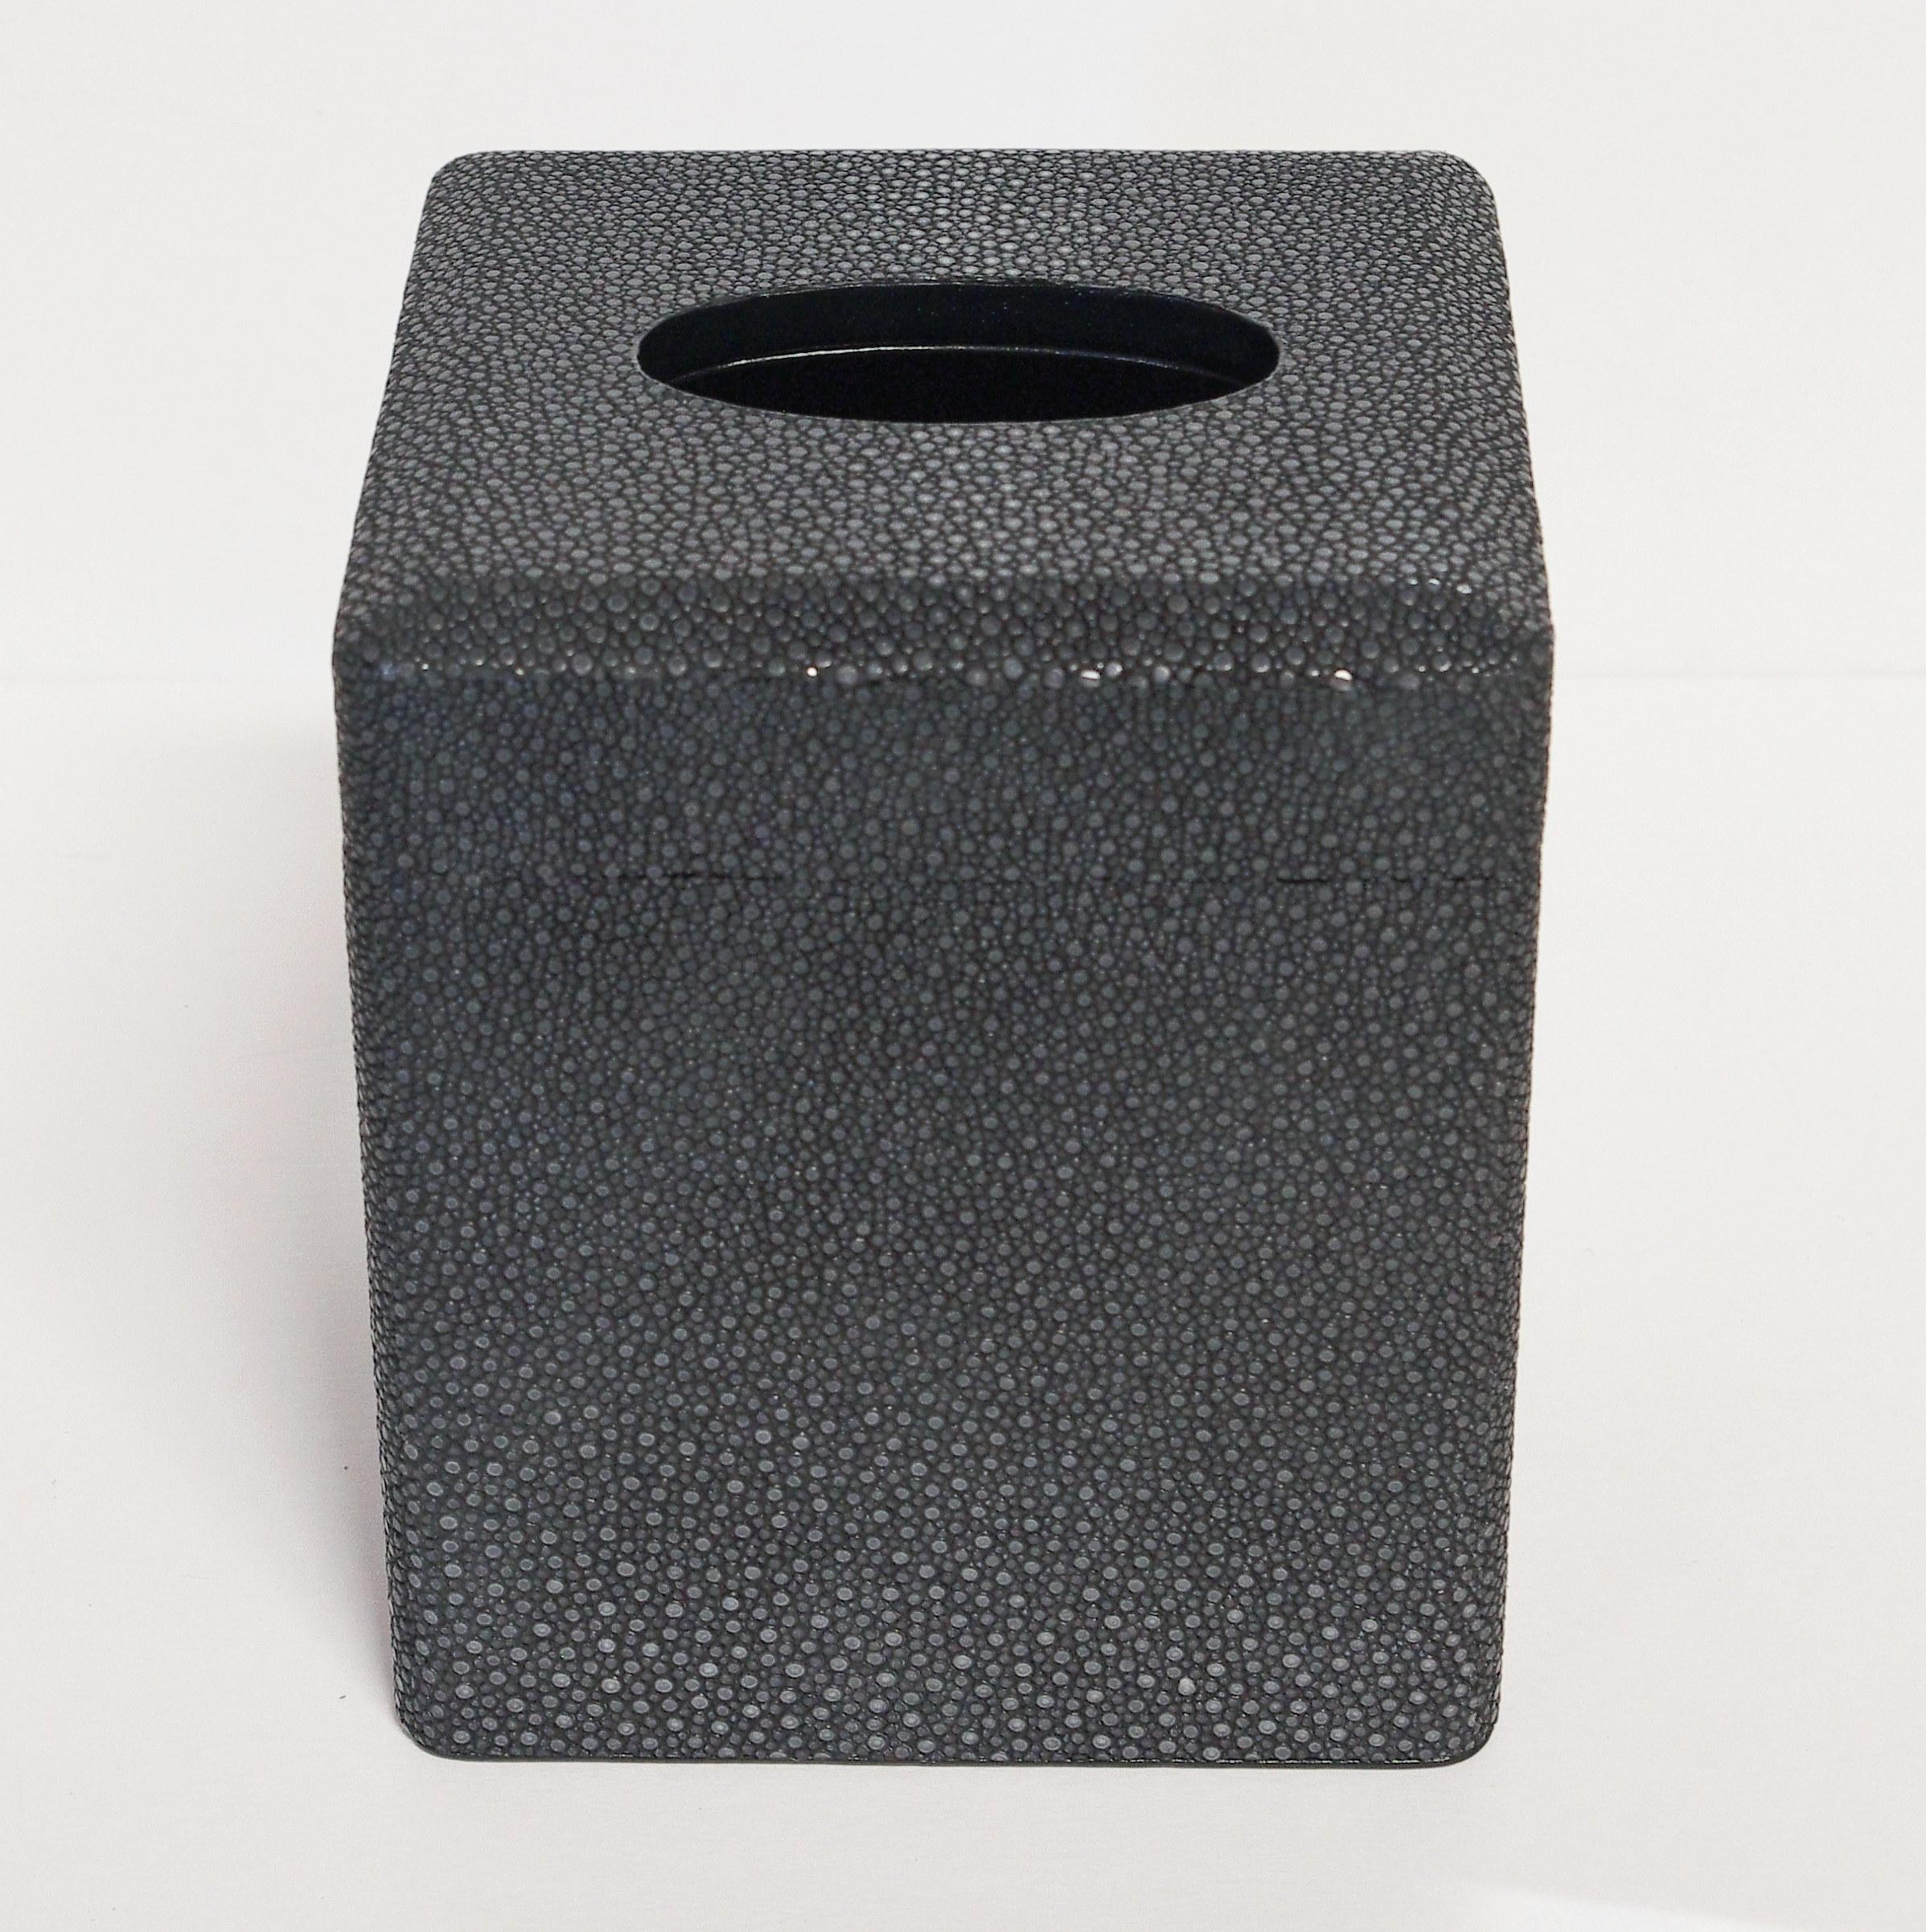 Italian black Shagreen tissue box with black leather presentation box designed by Fabio Bergomi for Fabio Ltd, made in Italy.
Measures: Height 6 inches, depth 5 inches, width 5 inches
LAST 1 in stock in Los Angeles
Order reference #: FABIOLTD